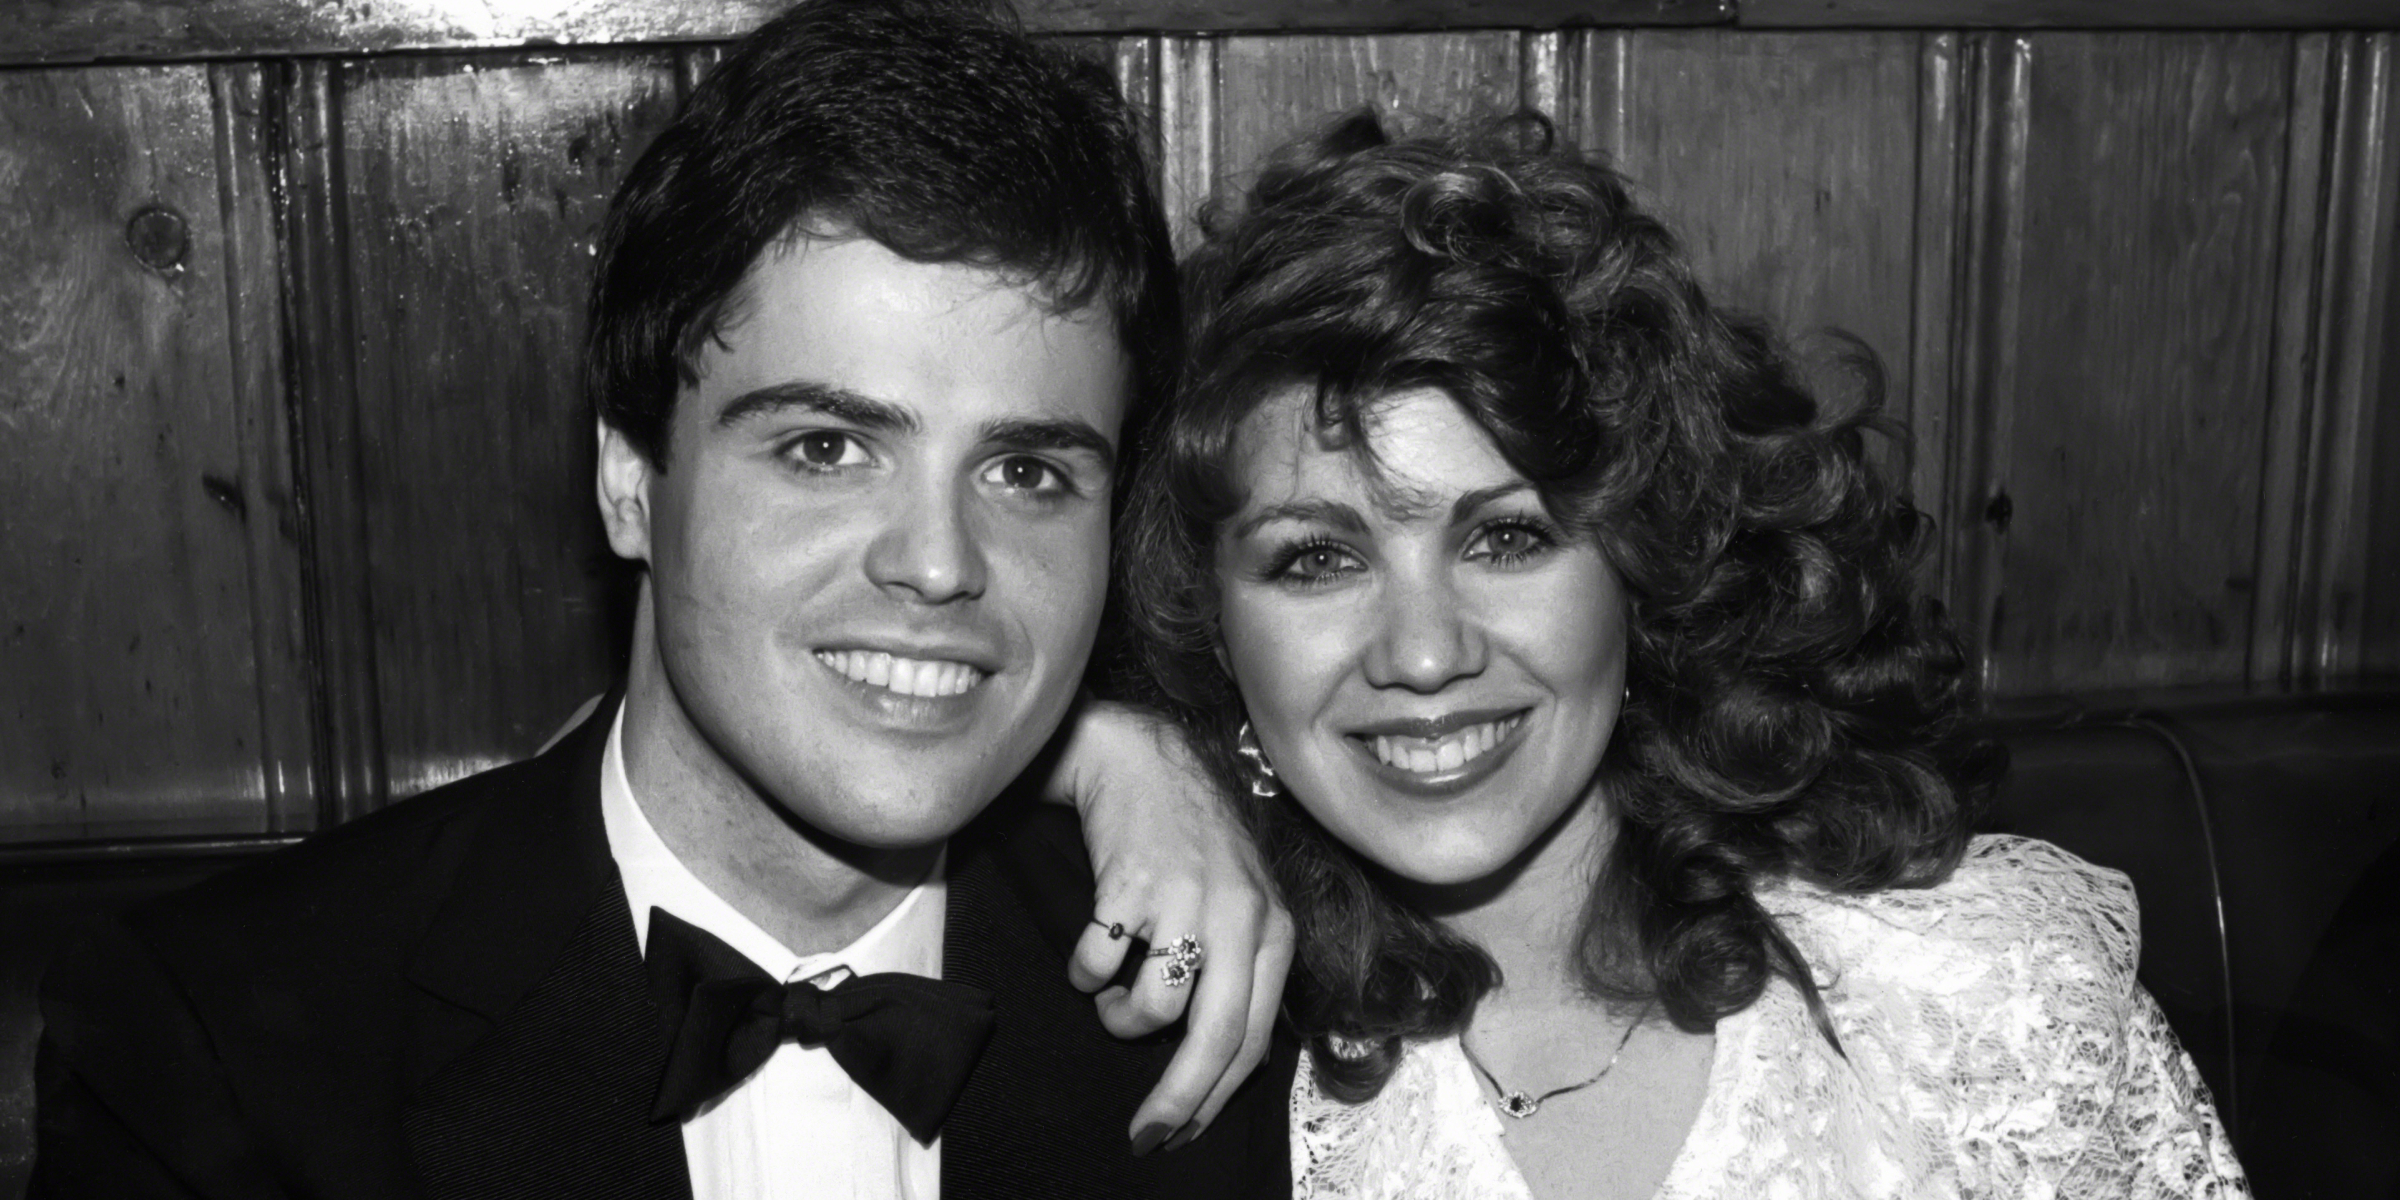 Donny and Debbie Osmond | Source: Getty Images